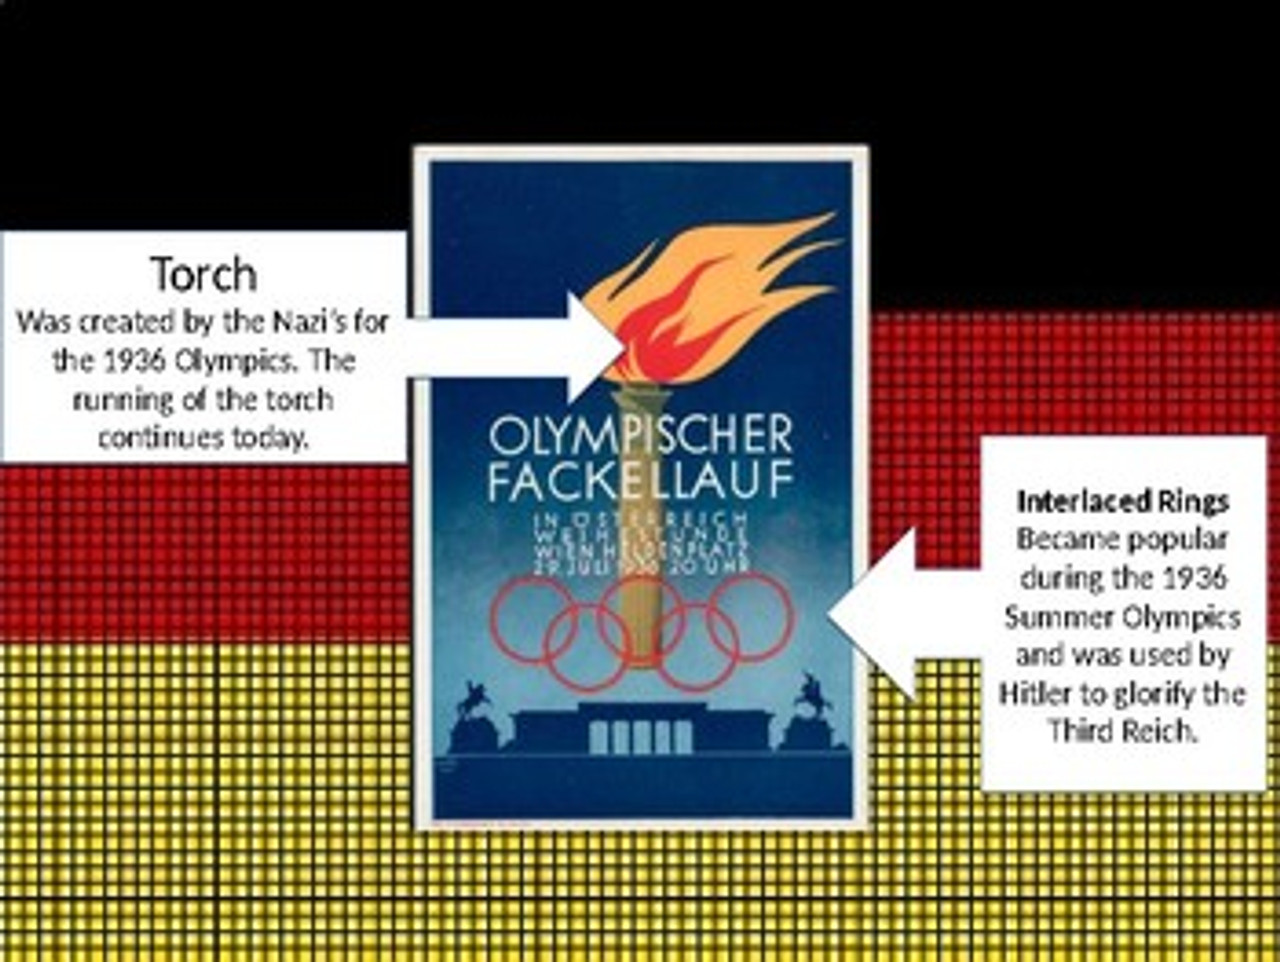 World Geography & Government: Hitler's Olympics of 1936 Propaganda (PowerPoint)